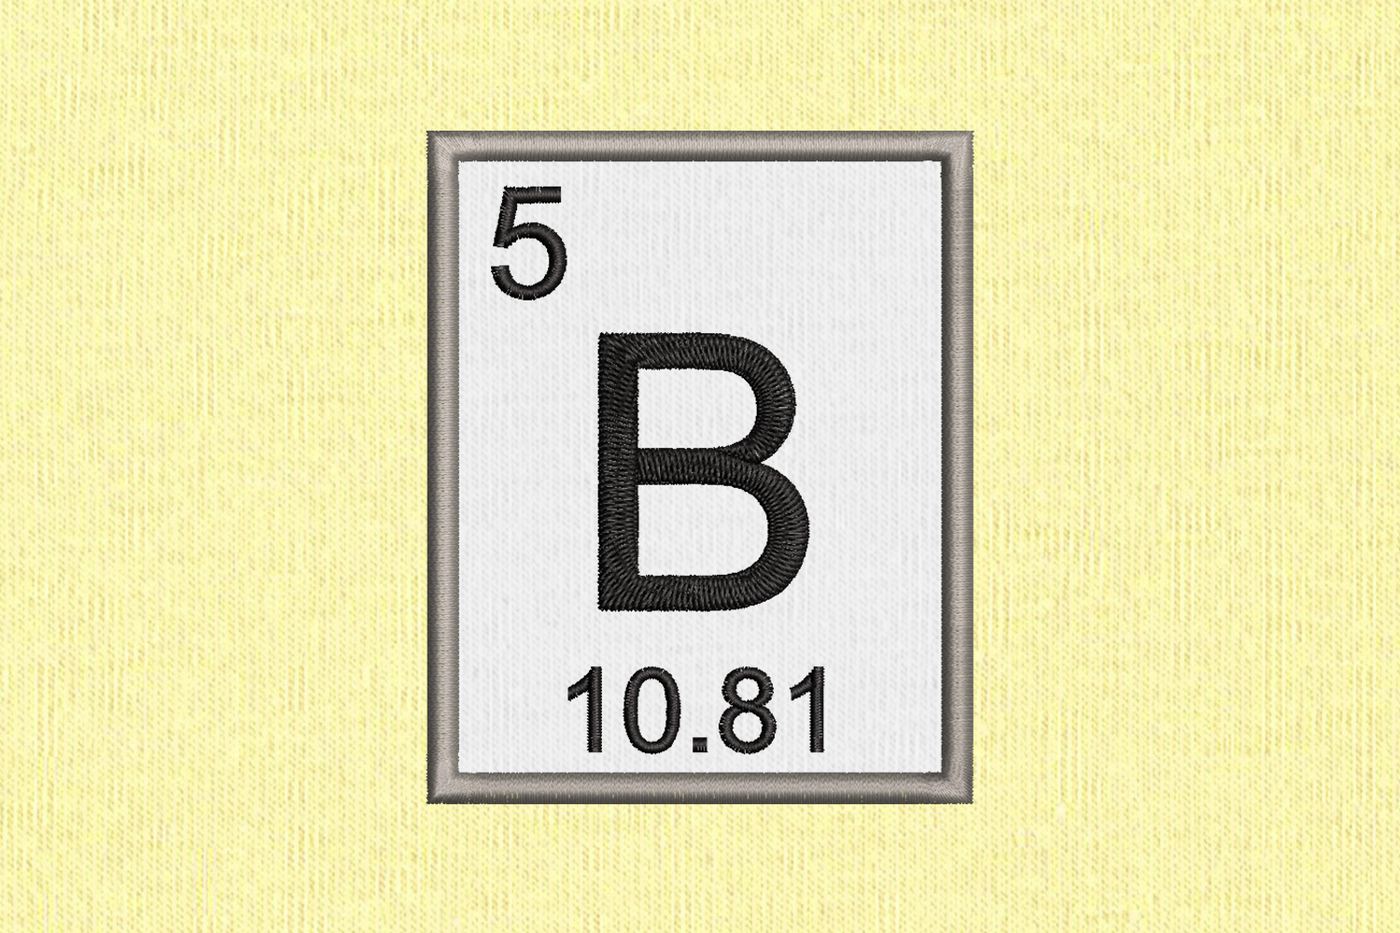 Applique design for the chemical element information for boron.